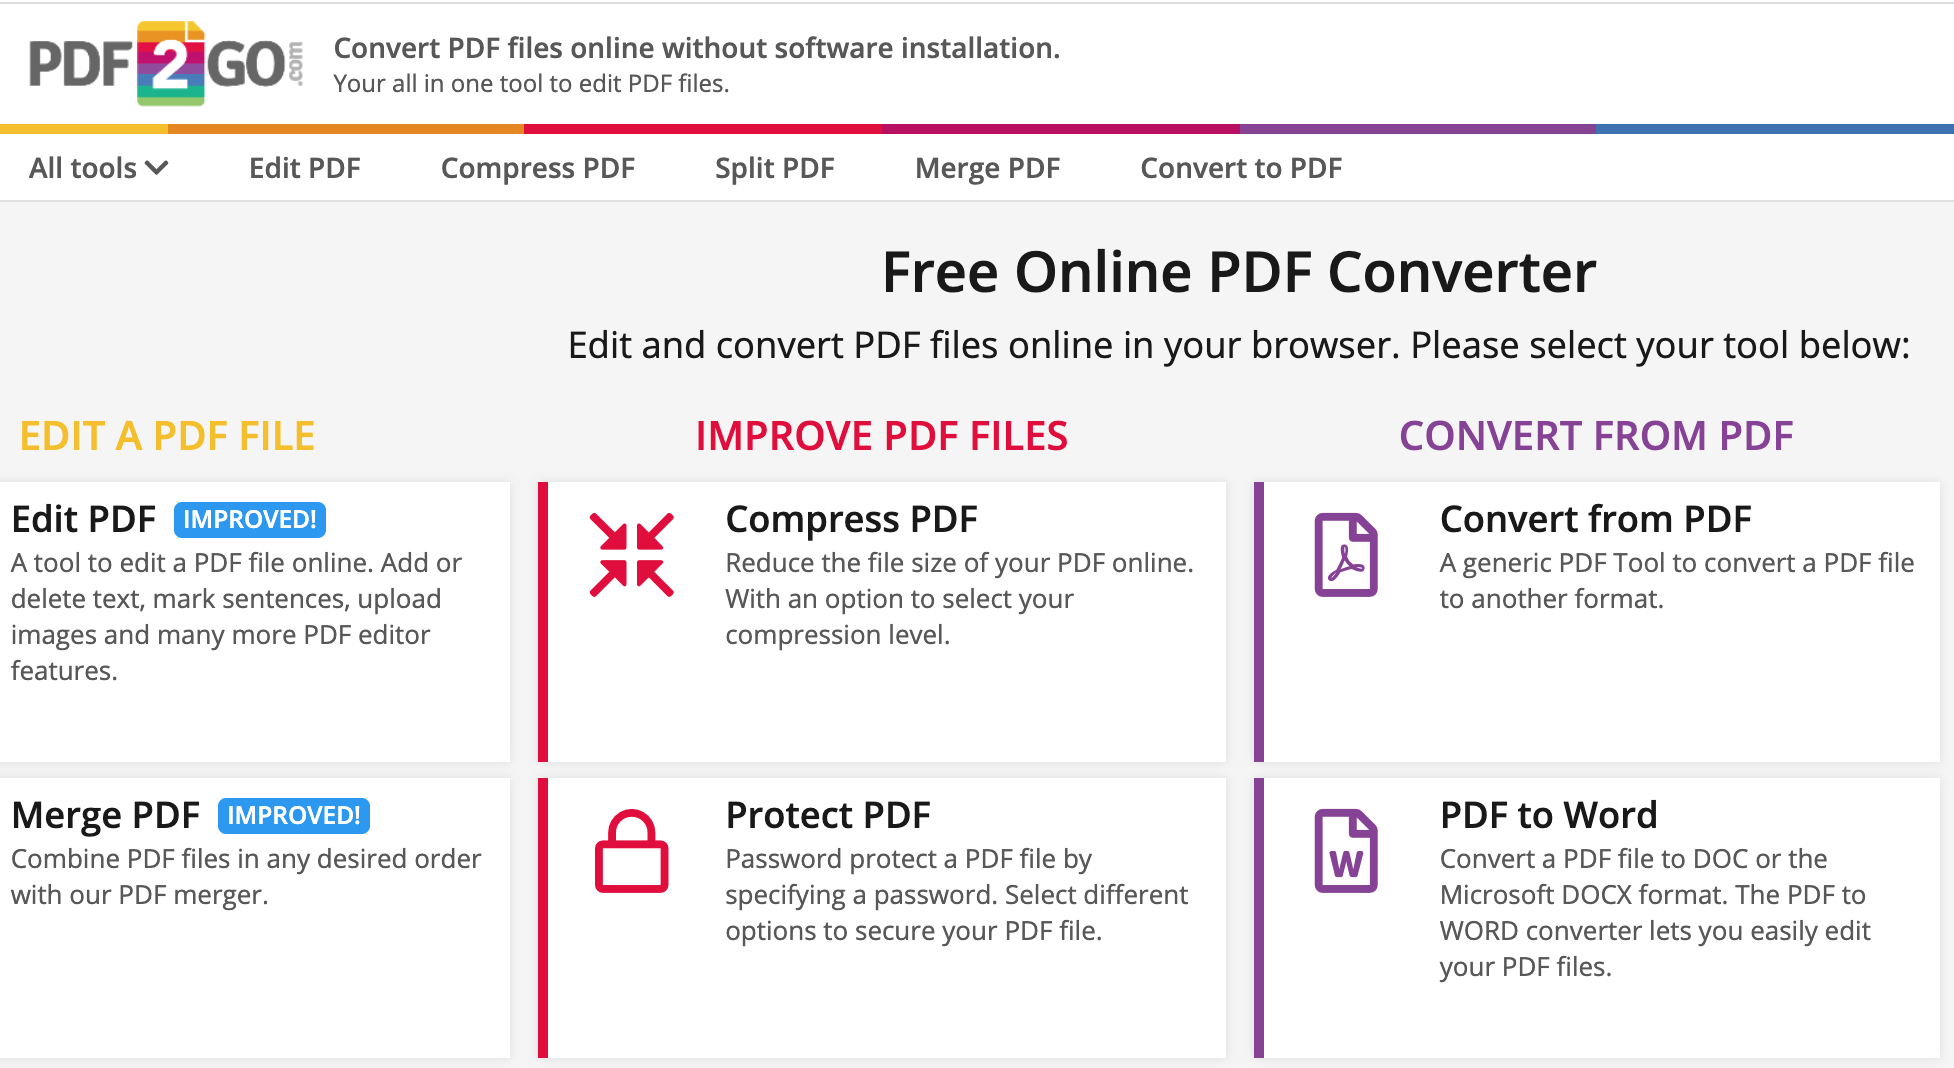 convert pdf to smaller size online free